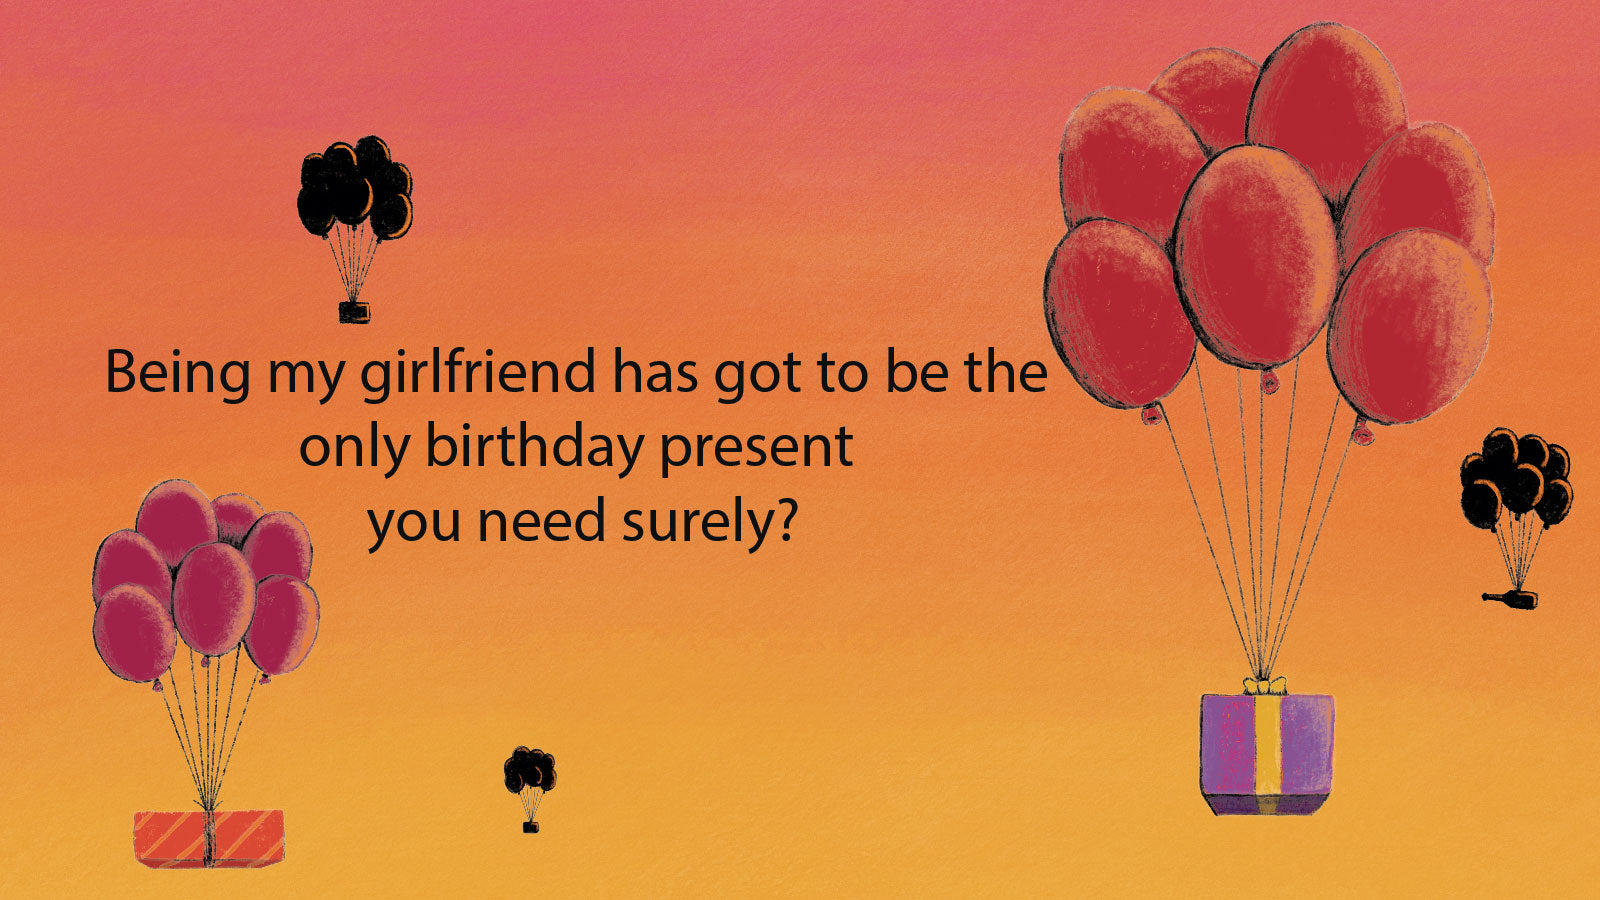 Beautiful Birthday Wishes For Your Wife - Being The Parent